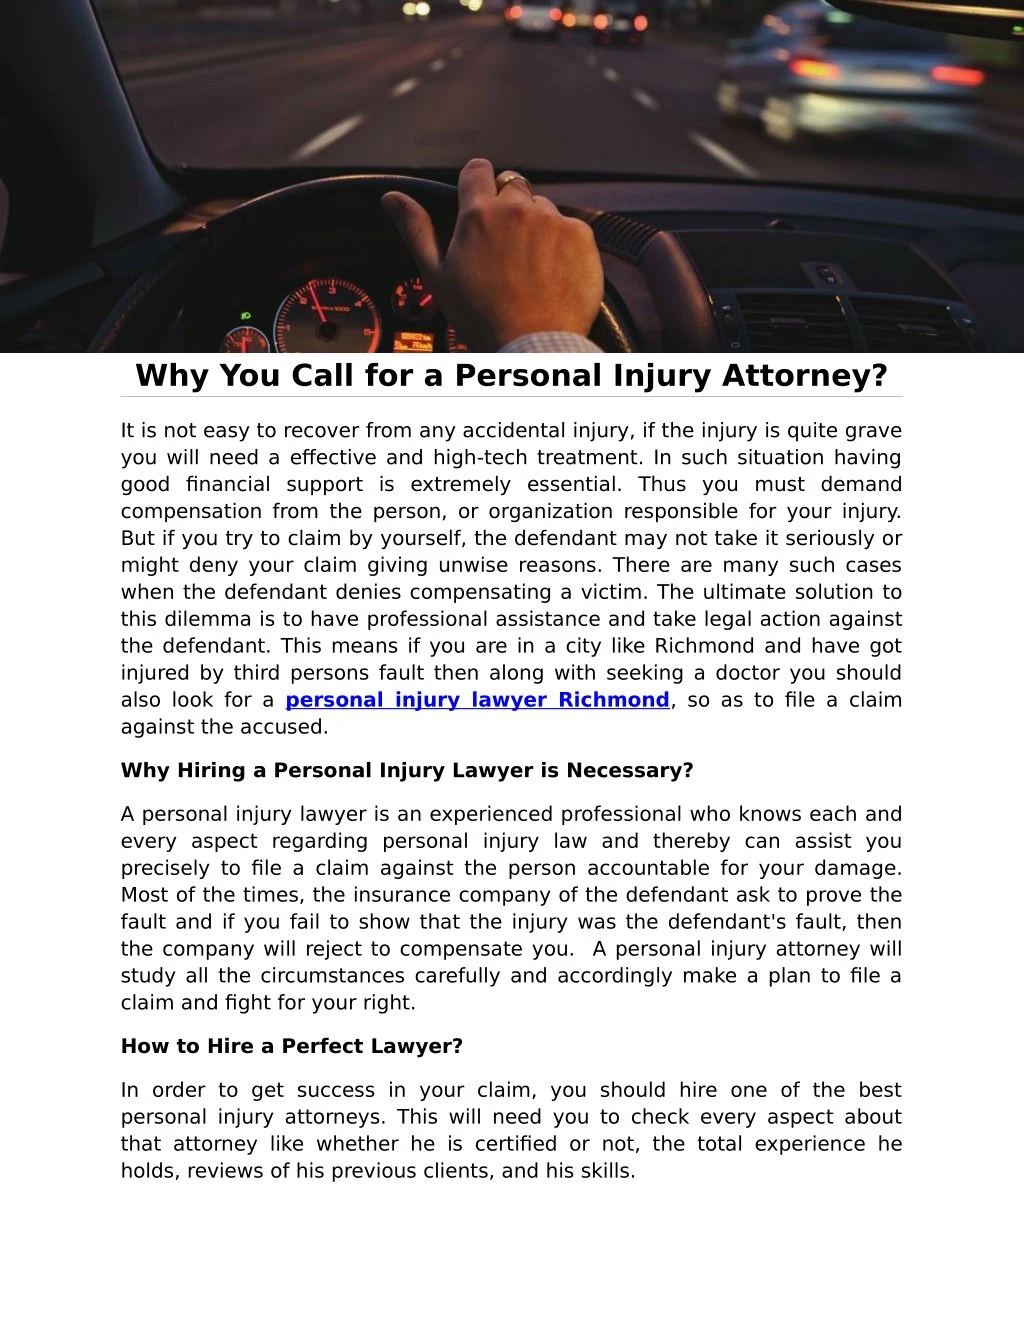 why you call for a personal injury attorney